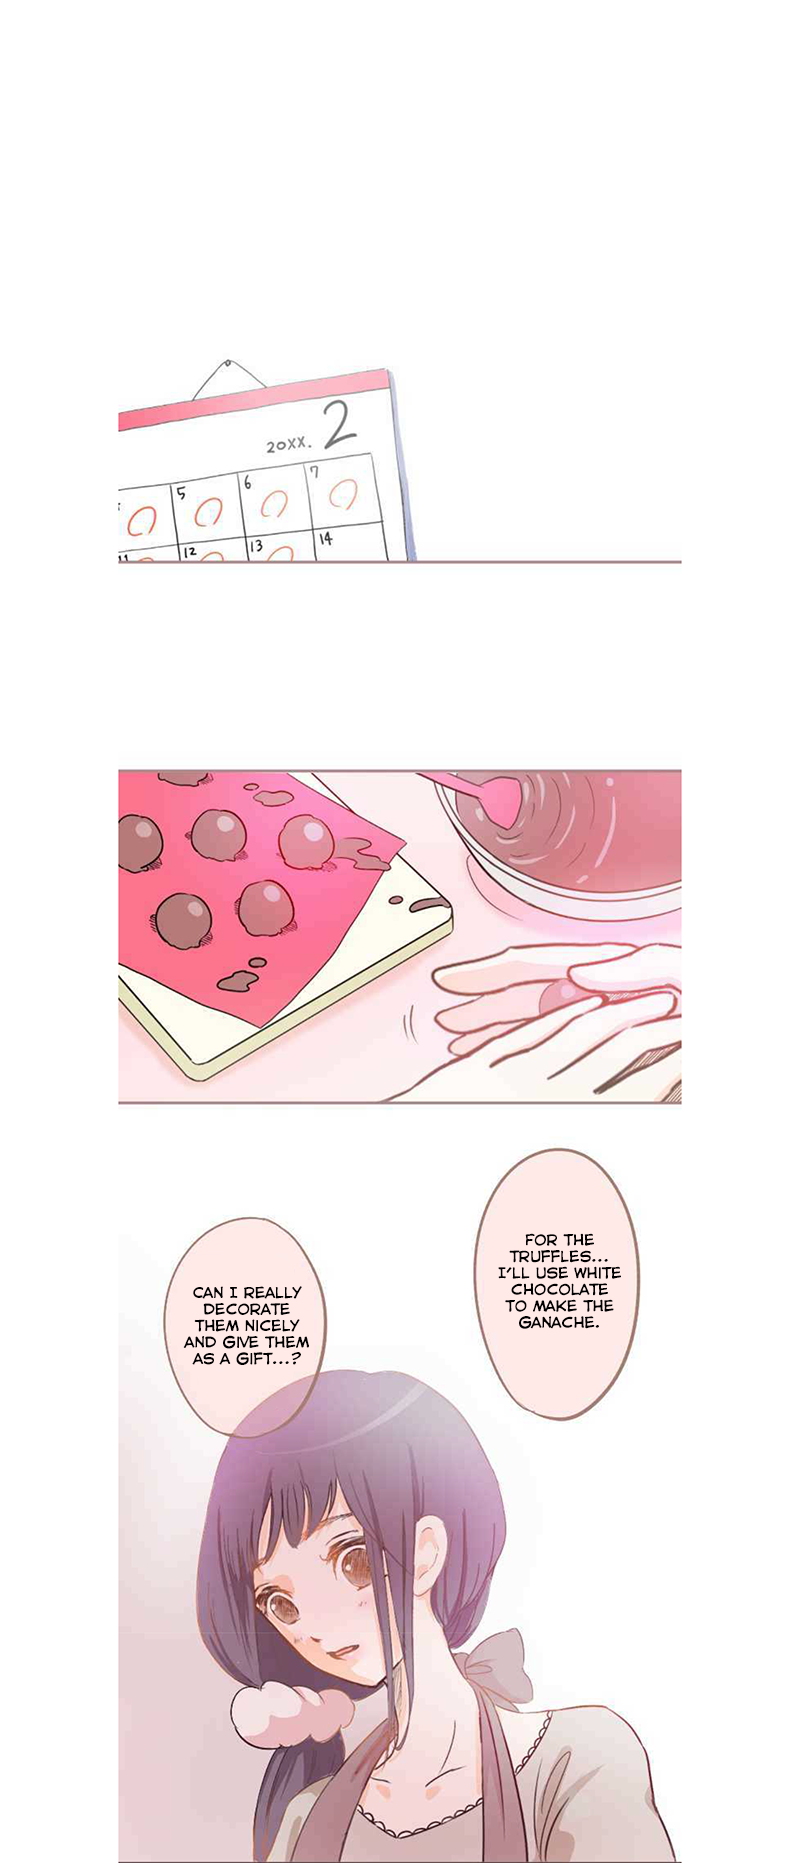 Let Me Eat You - Page 1